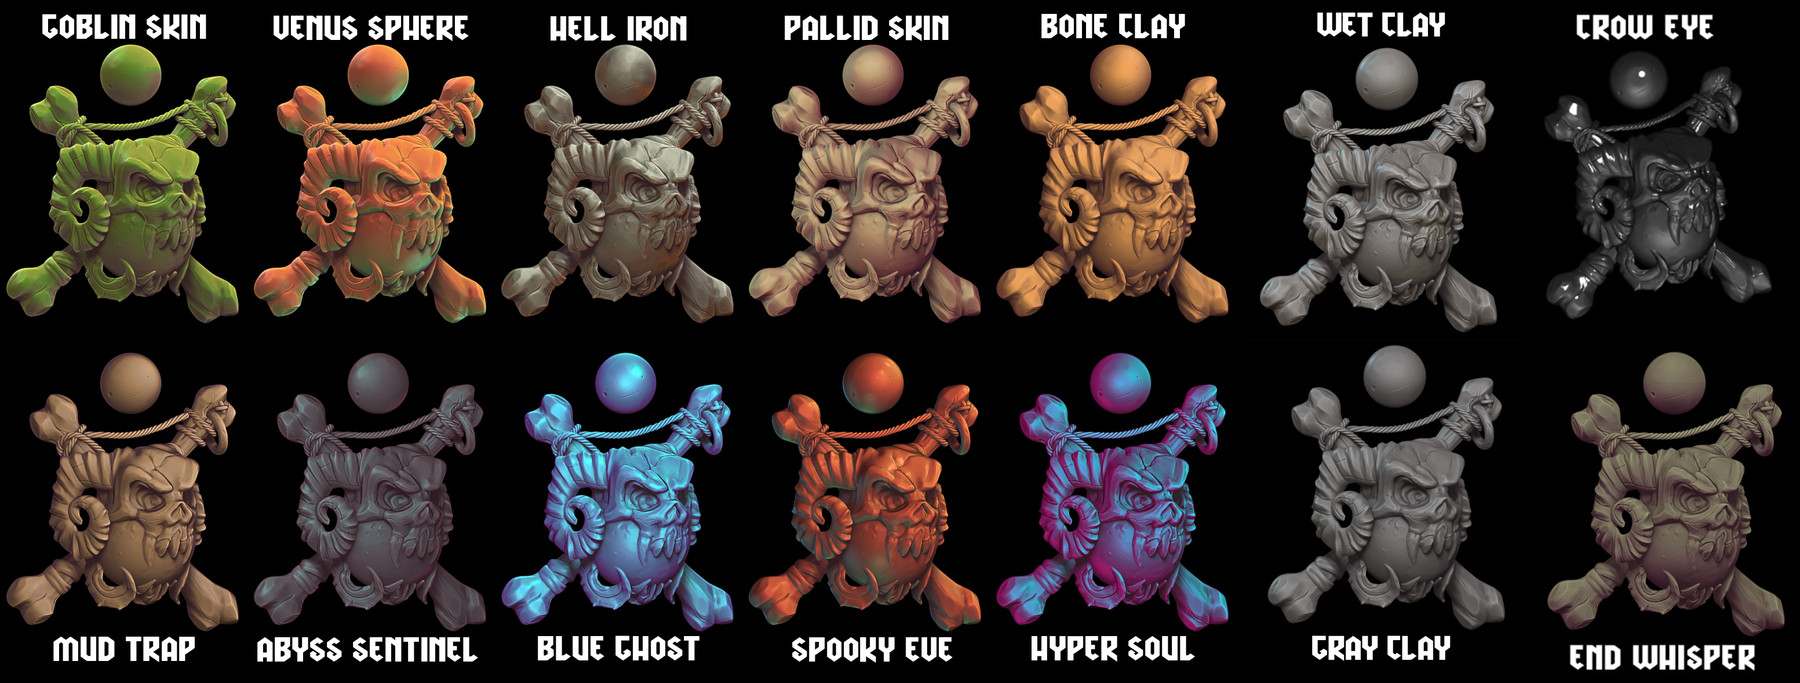 emulate zbrush matcaps but with real lighting